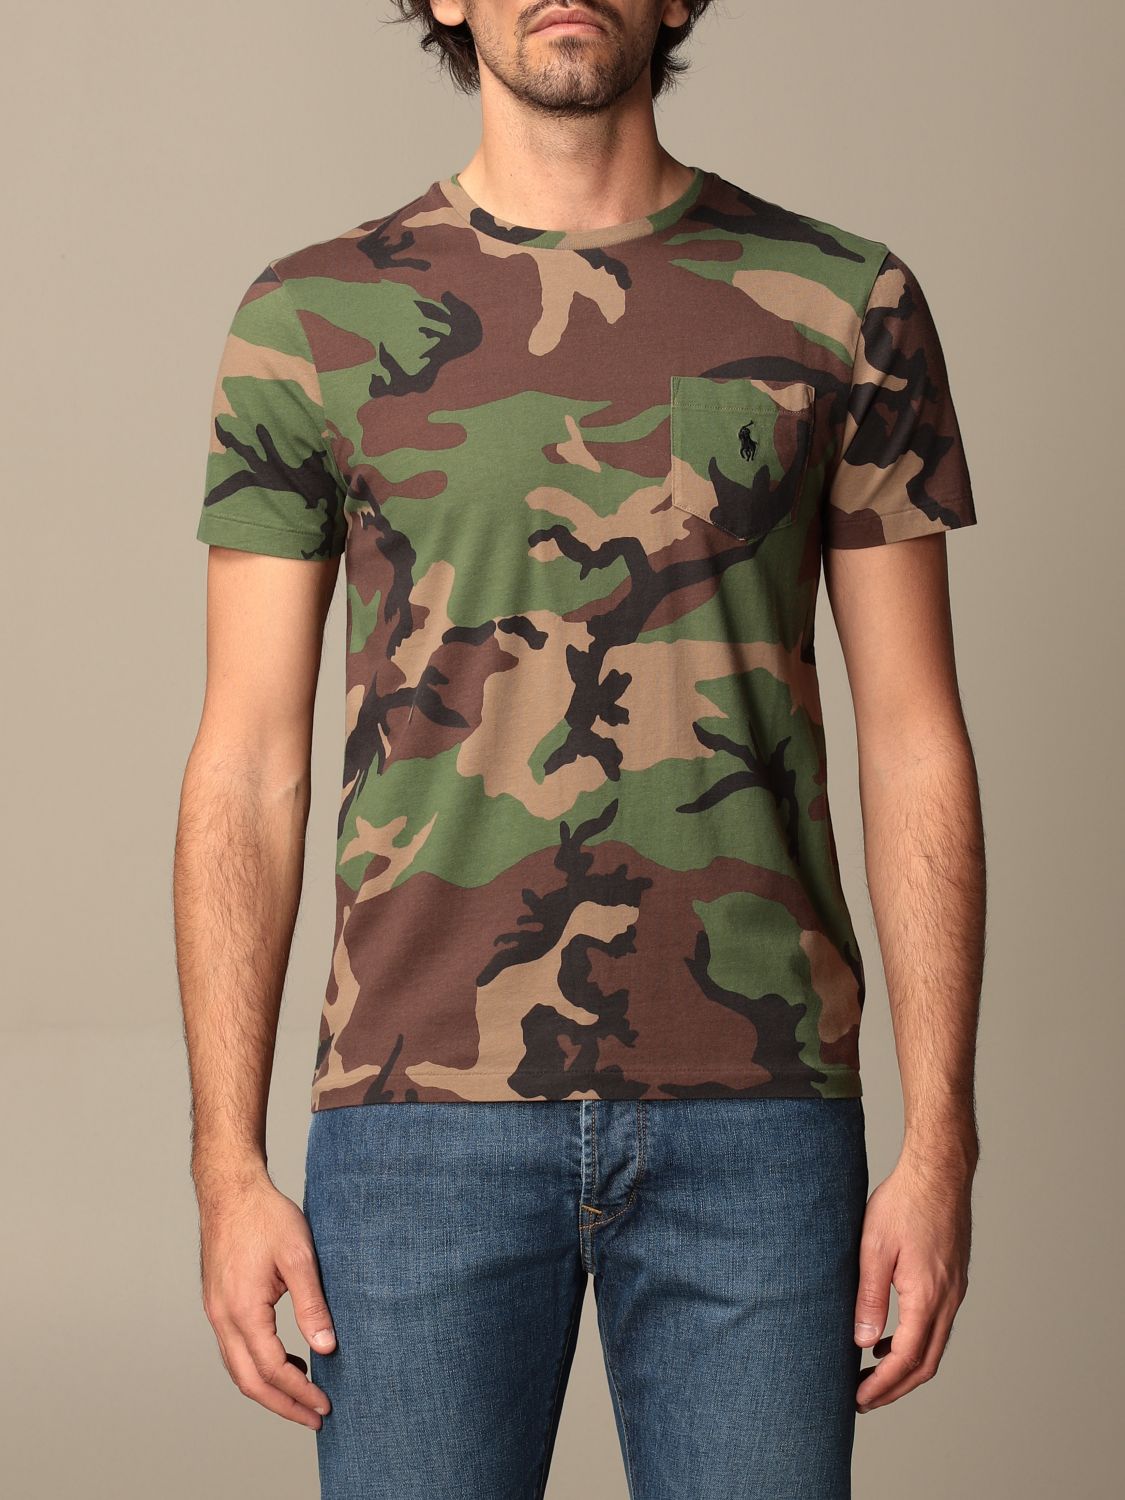 POLO RALPH LAUREN: t-shirt in camouflage cotton - Green | Polo Ralph Lauren  t-shirt 710812948 online on 